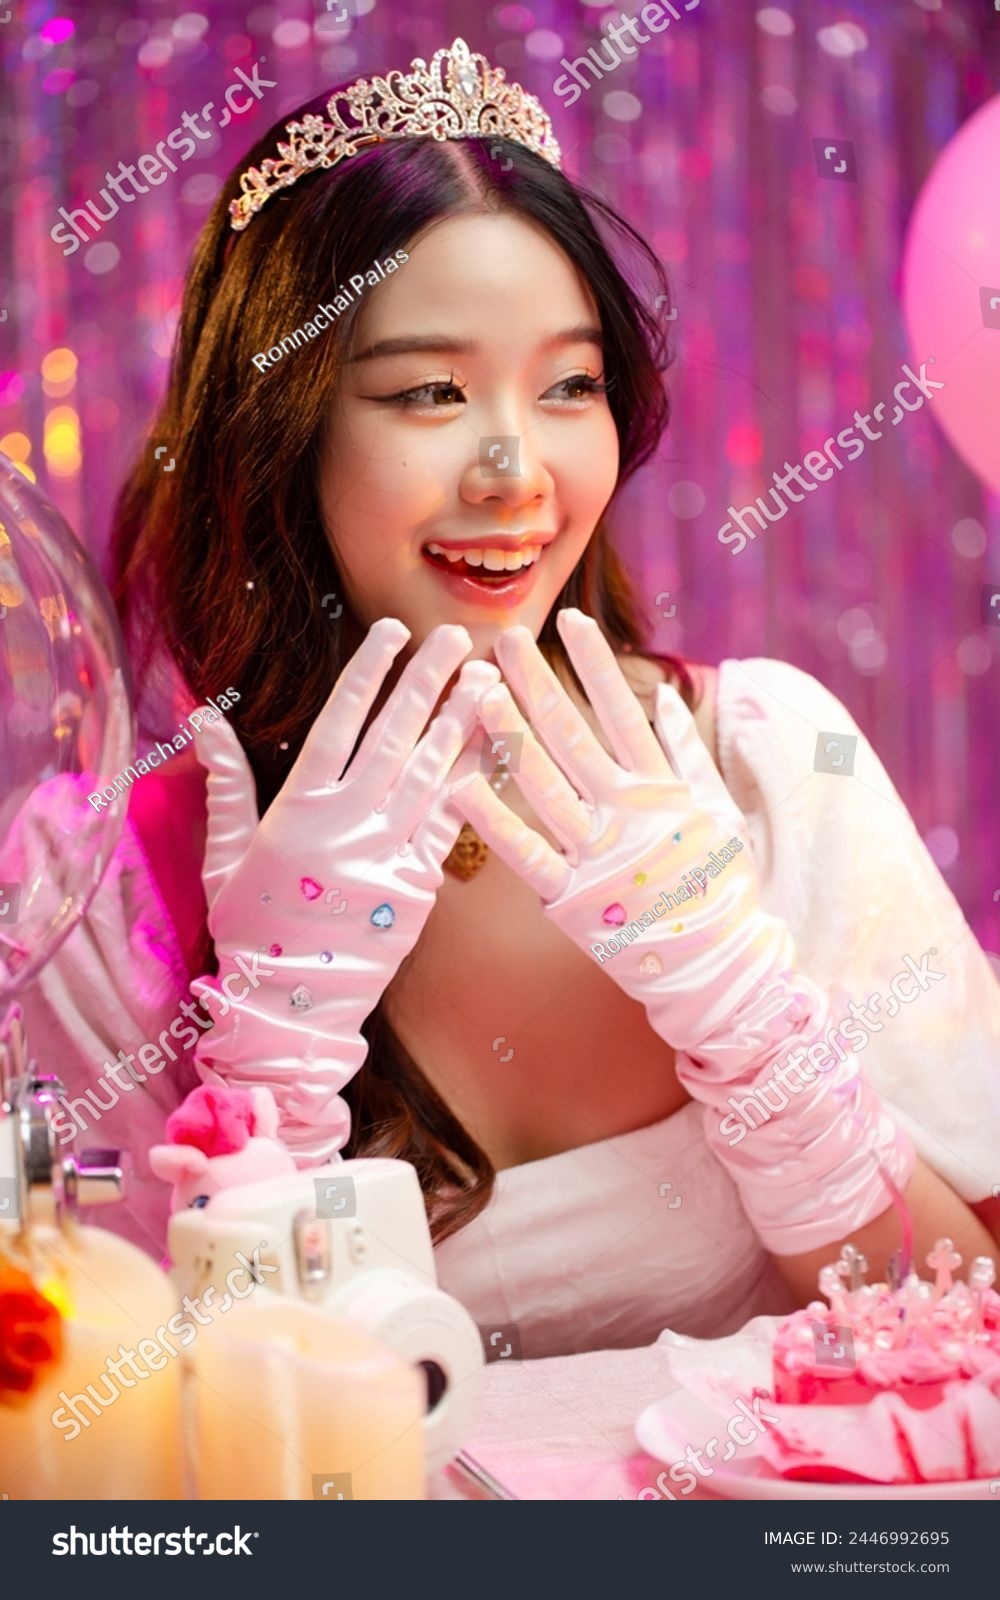 Happy beautiful Asian girl in princess dress showing birthday cake. Birthday princess photography theme is popular in social network. #2446992695